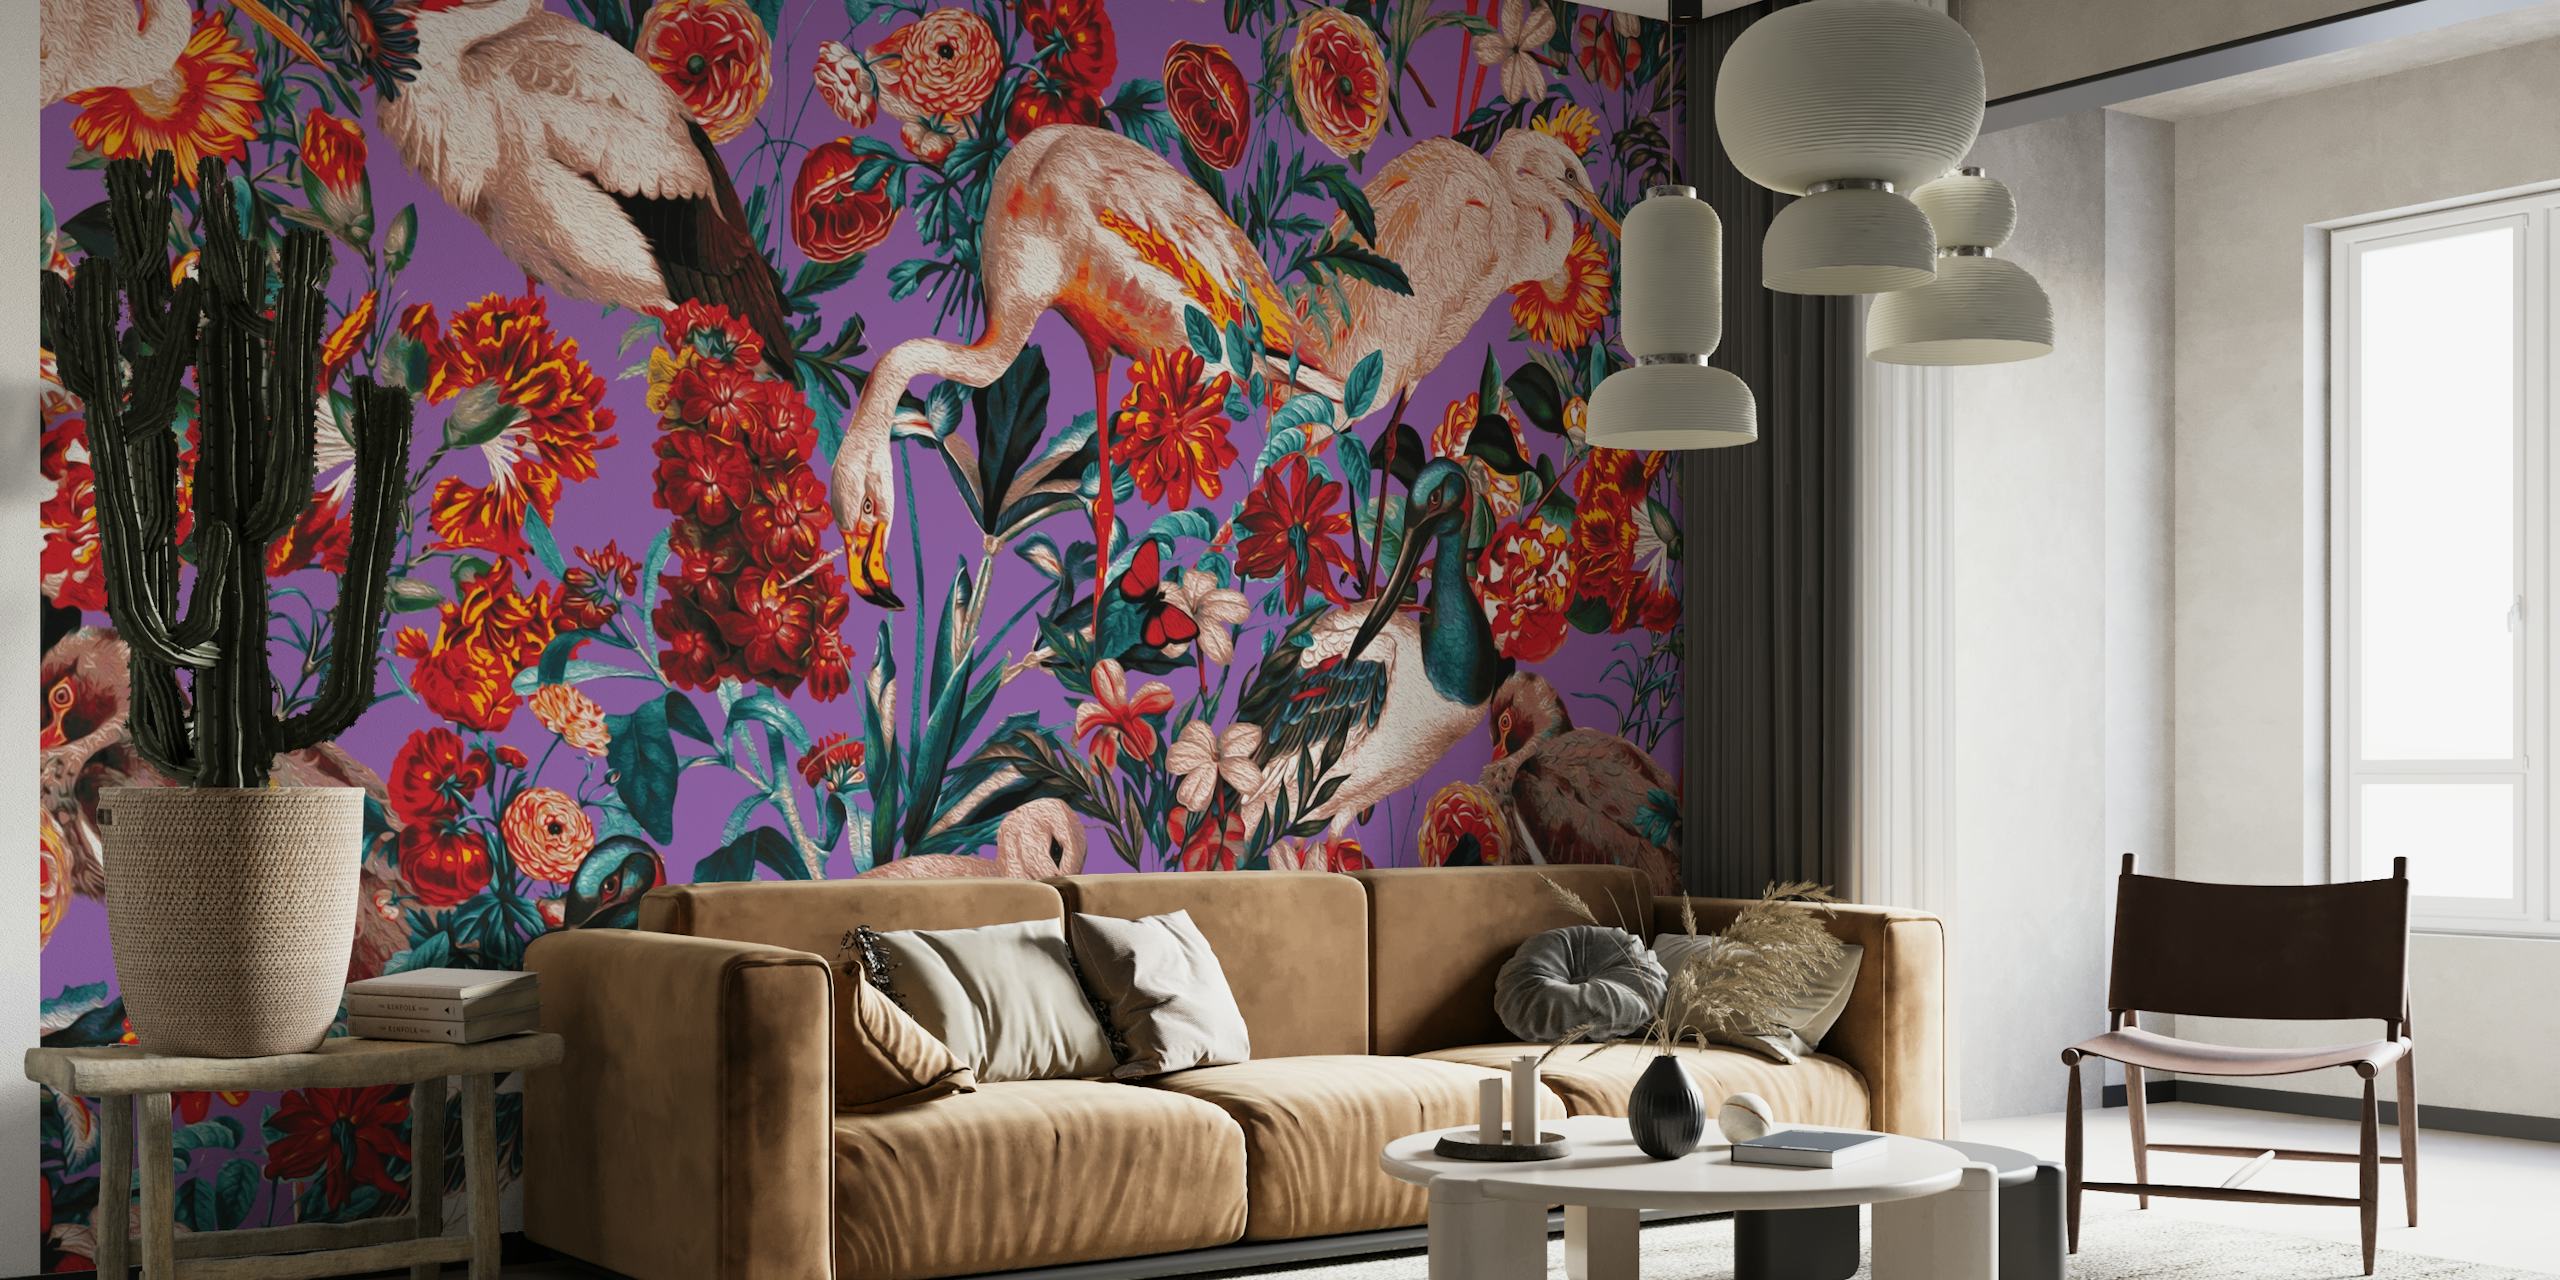 Exotic birds and floral wall mural in vivid colors